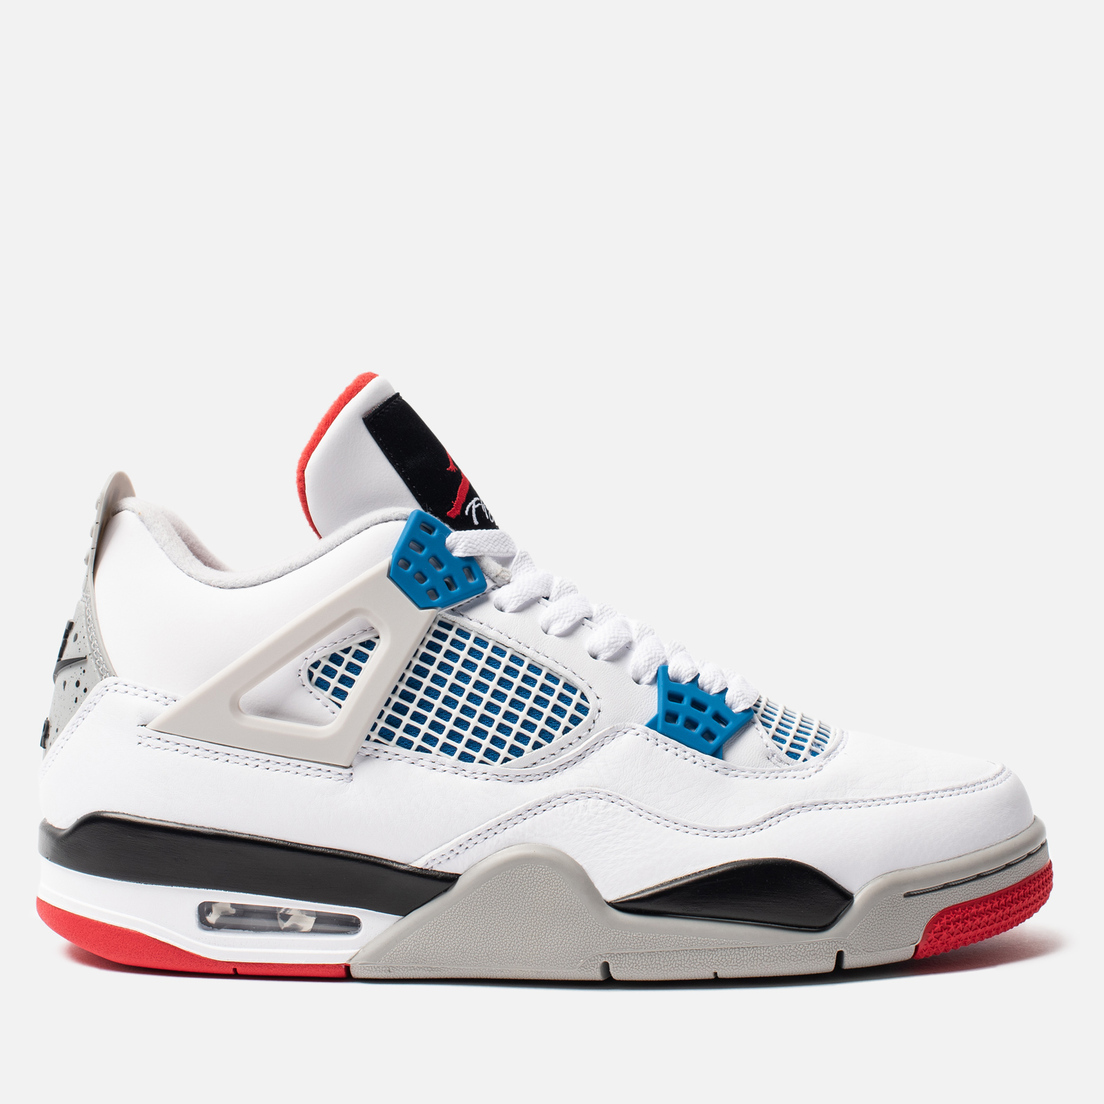 jordan 4 red and white and blue